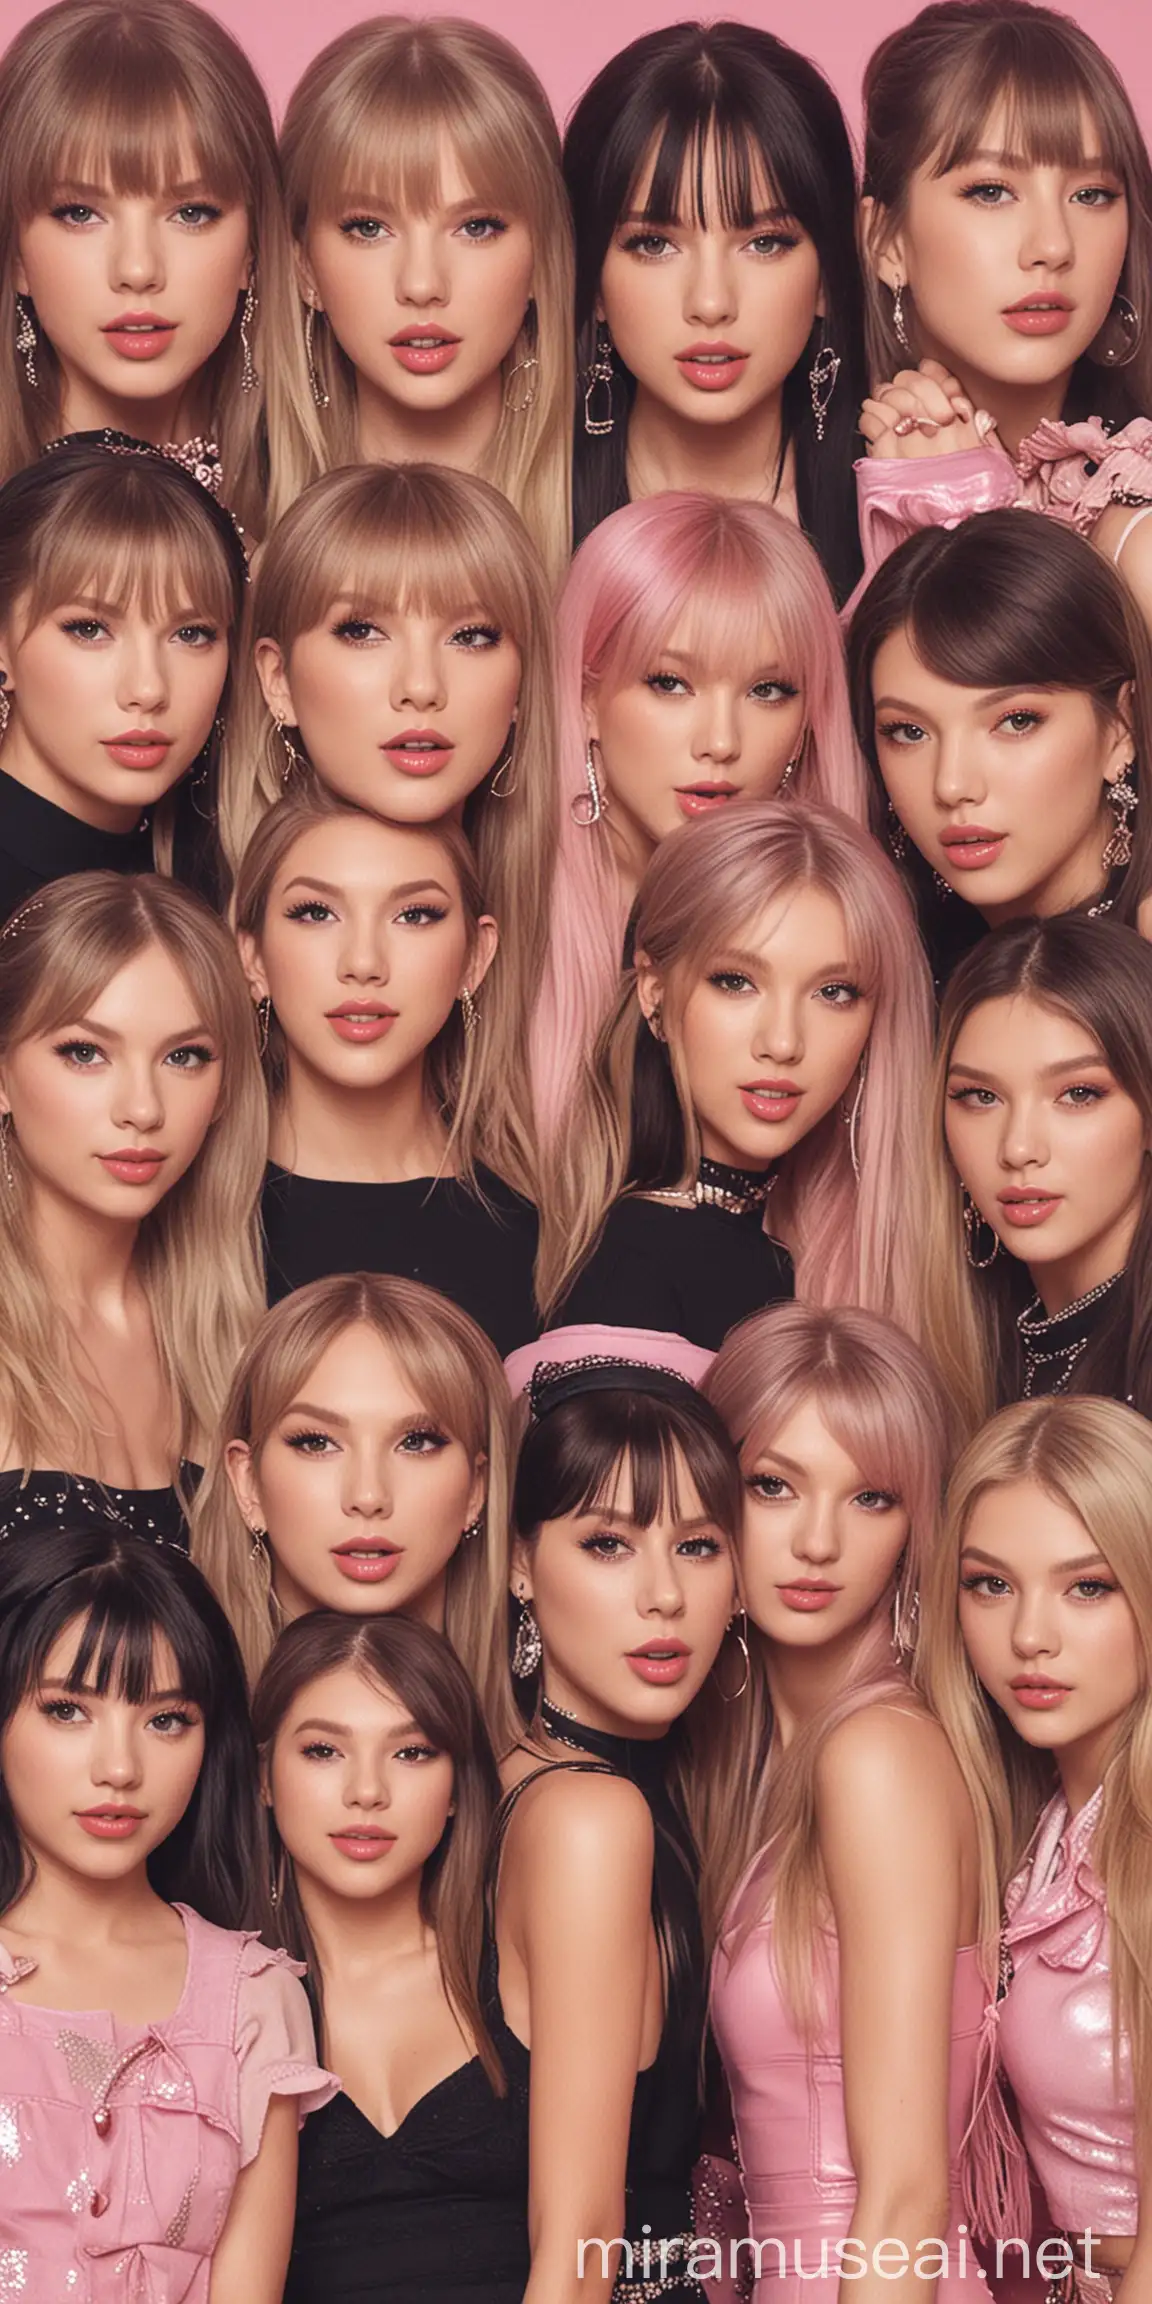 Pop Icon Taylor Swift Poses with KPop Sensation Black Pink